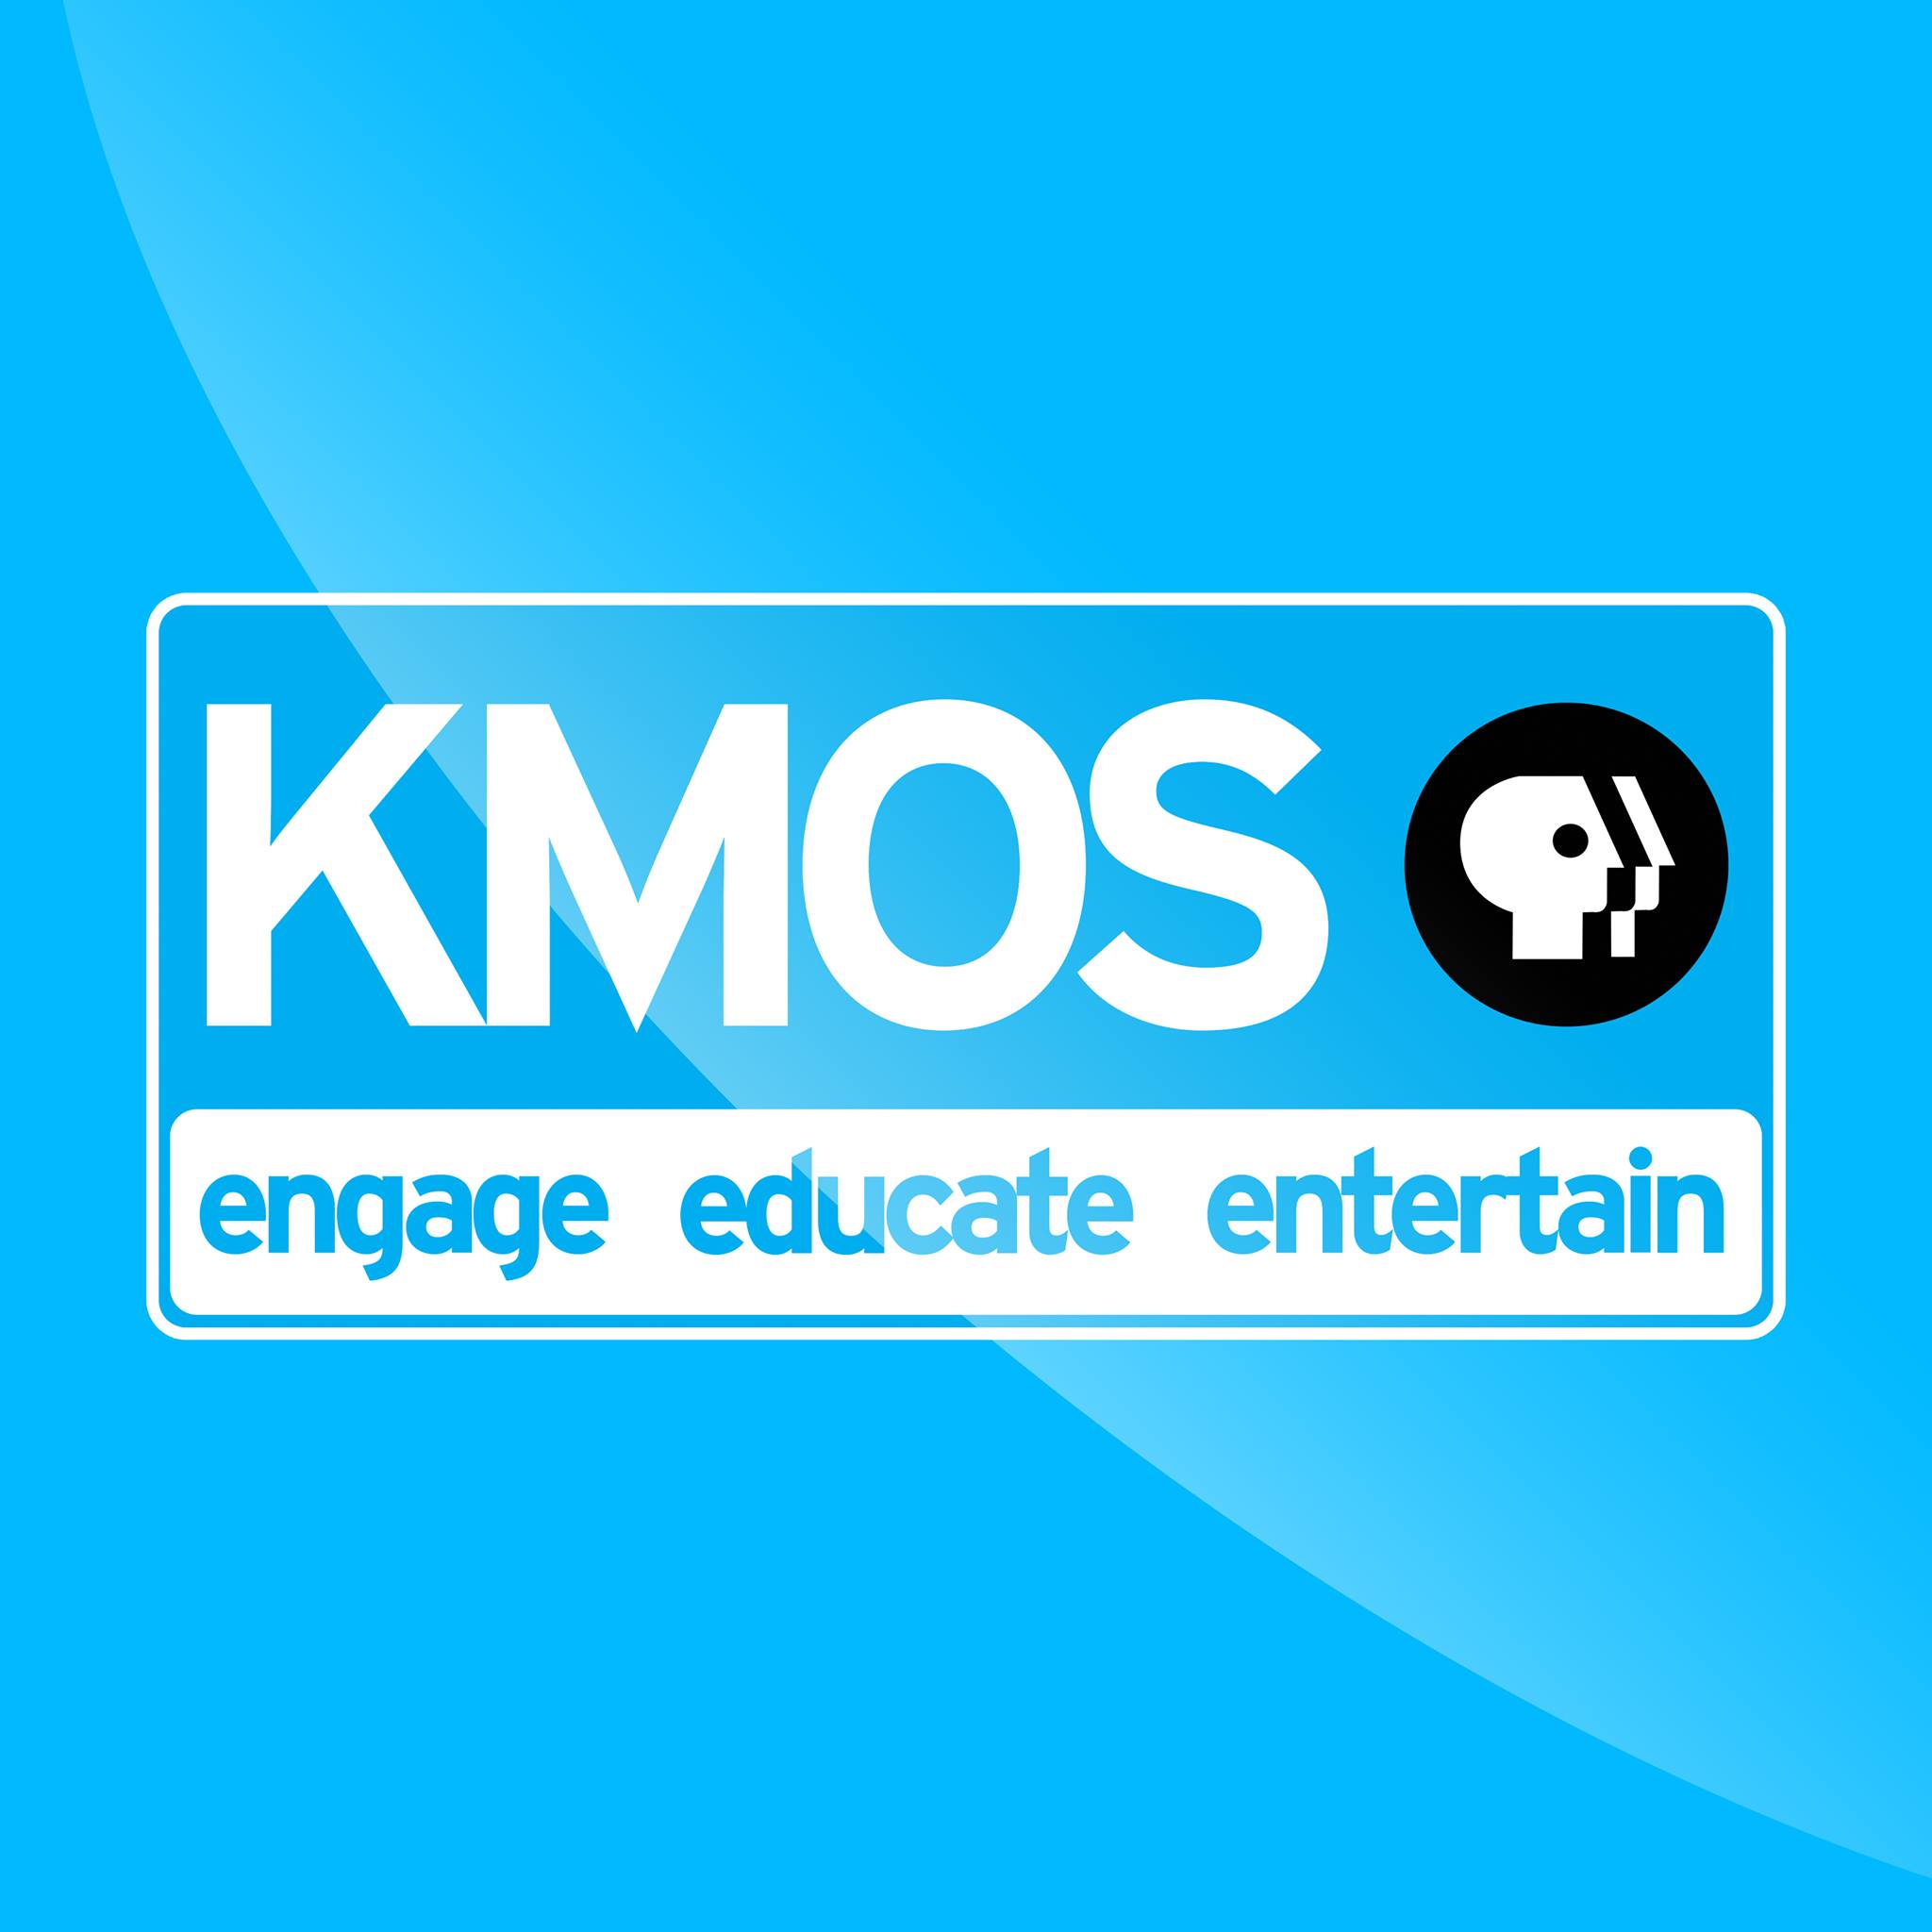 KMOS director weighs in on budget proposal